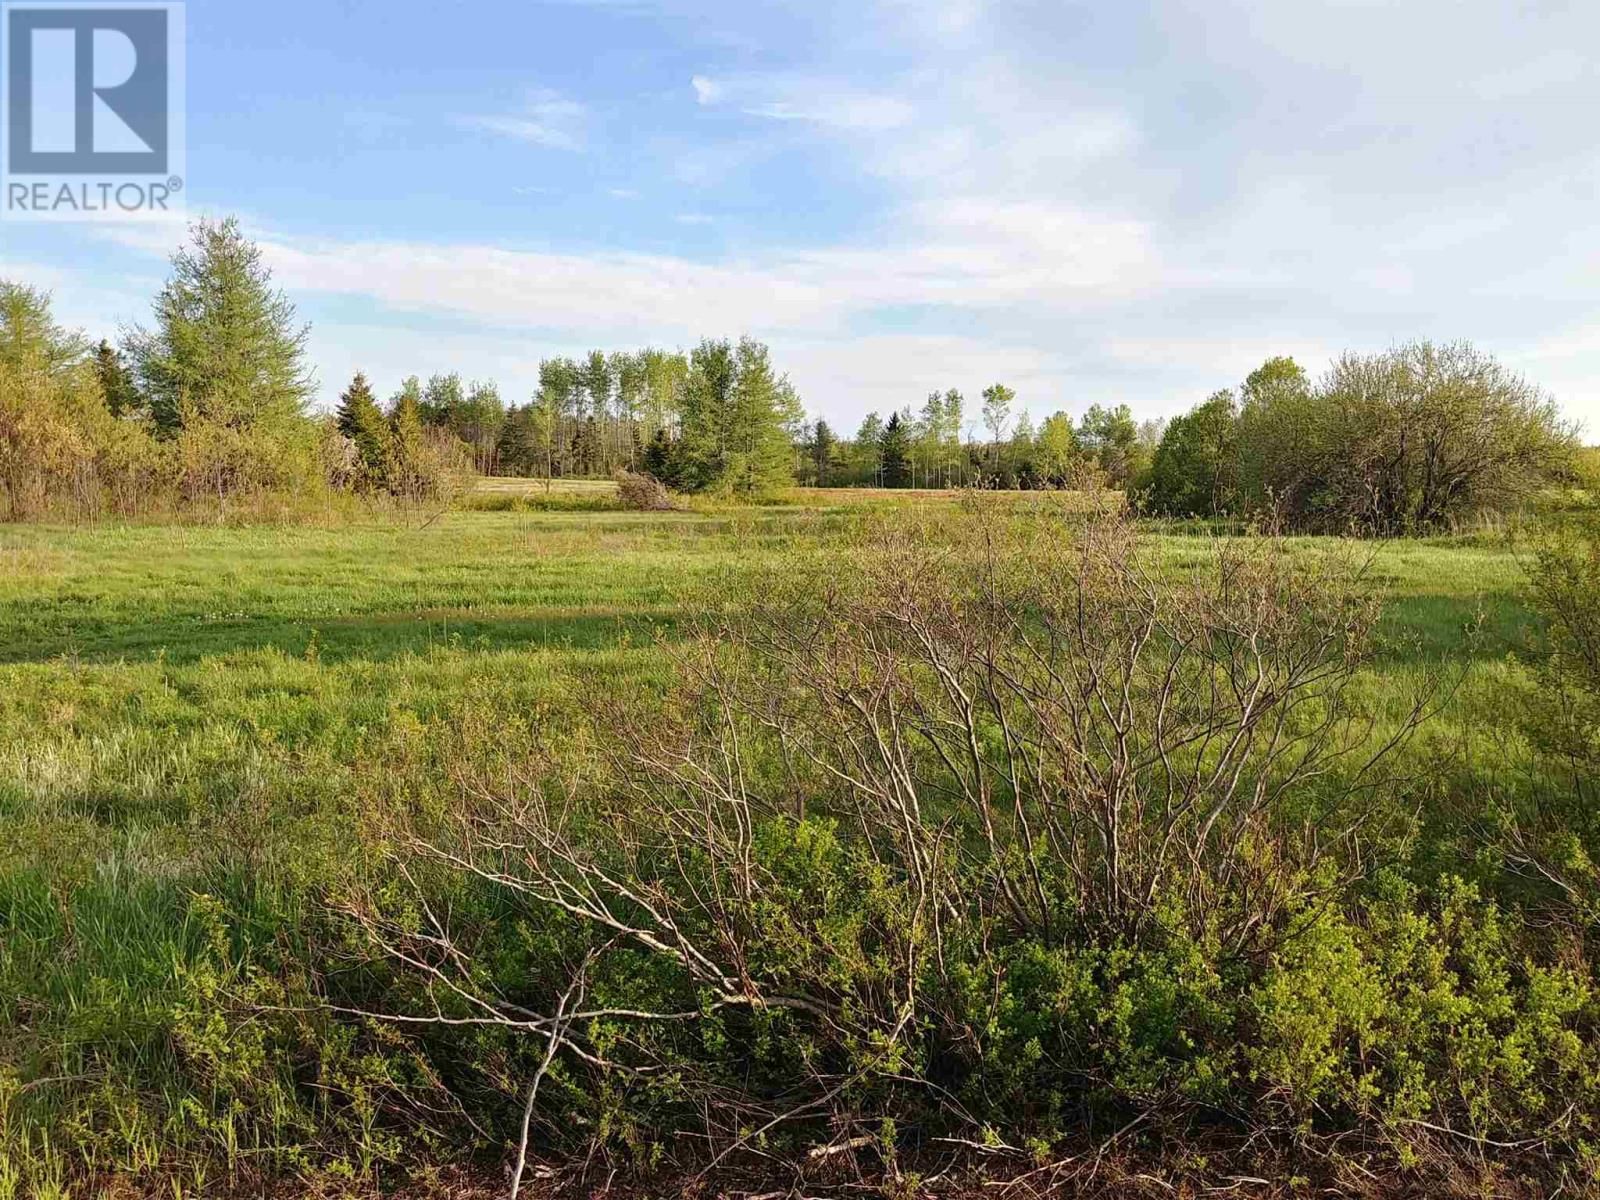 Main Photo: Route 2 in Fortune Bridge: Vacant Land for sale : MLS®# 202113690